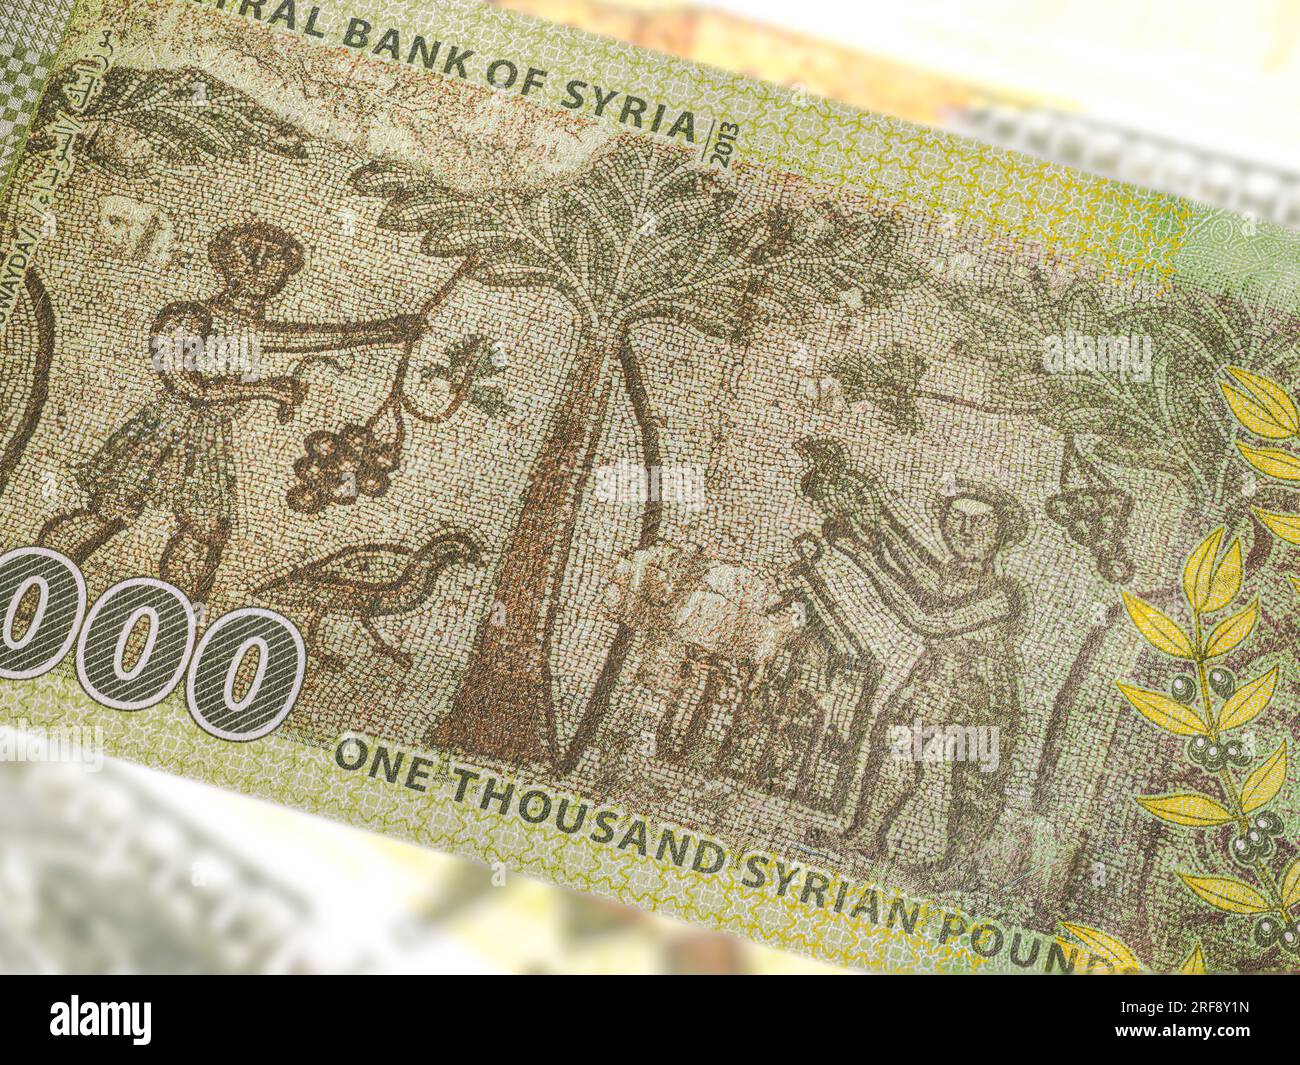 A close-up of a Syrian 1000 Pound banknote reveals intricate art and design. Amidst the country's turmoil, it showcases historical landmarks, symboliz Stock Photo